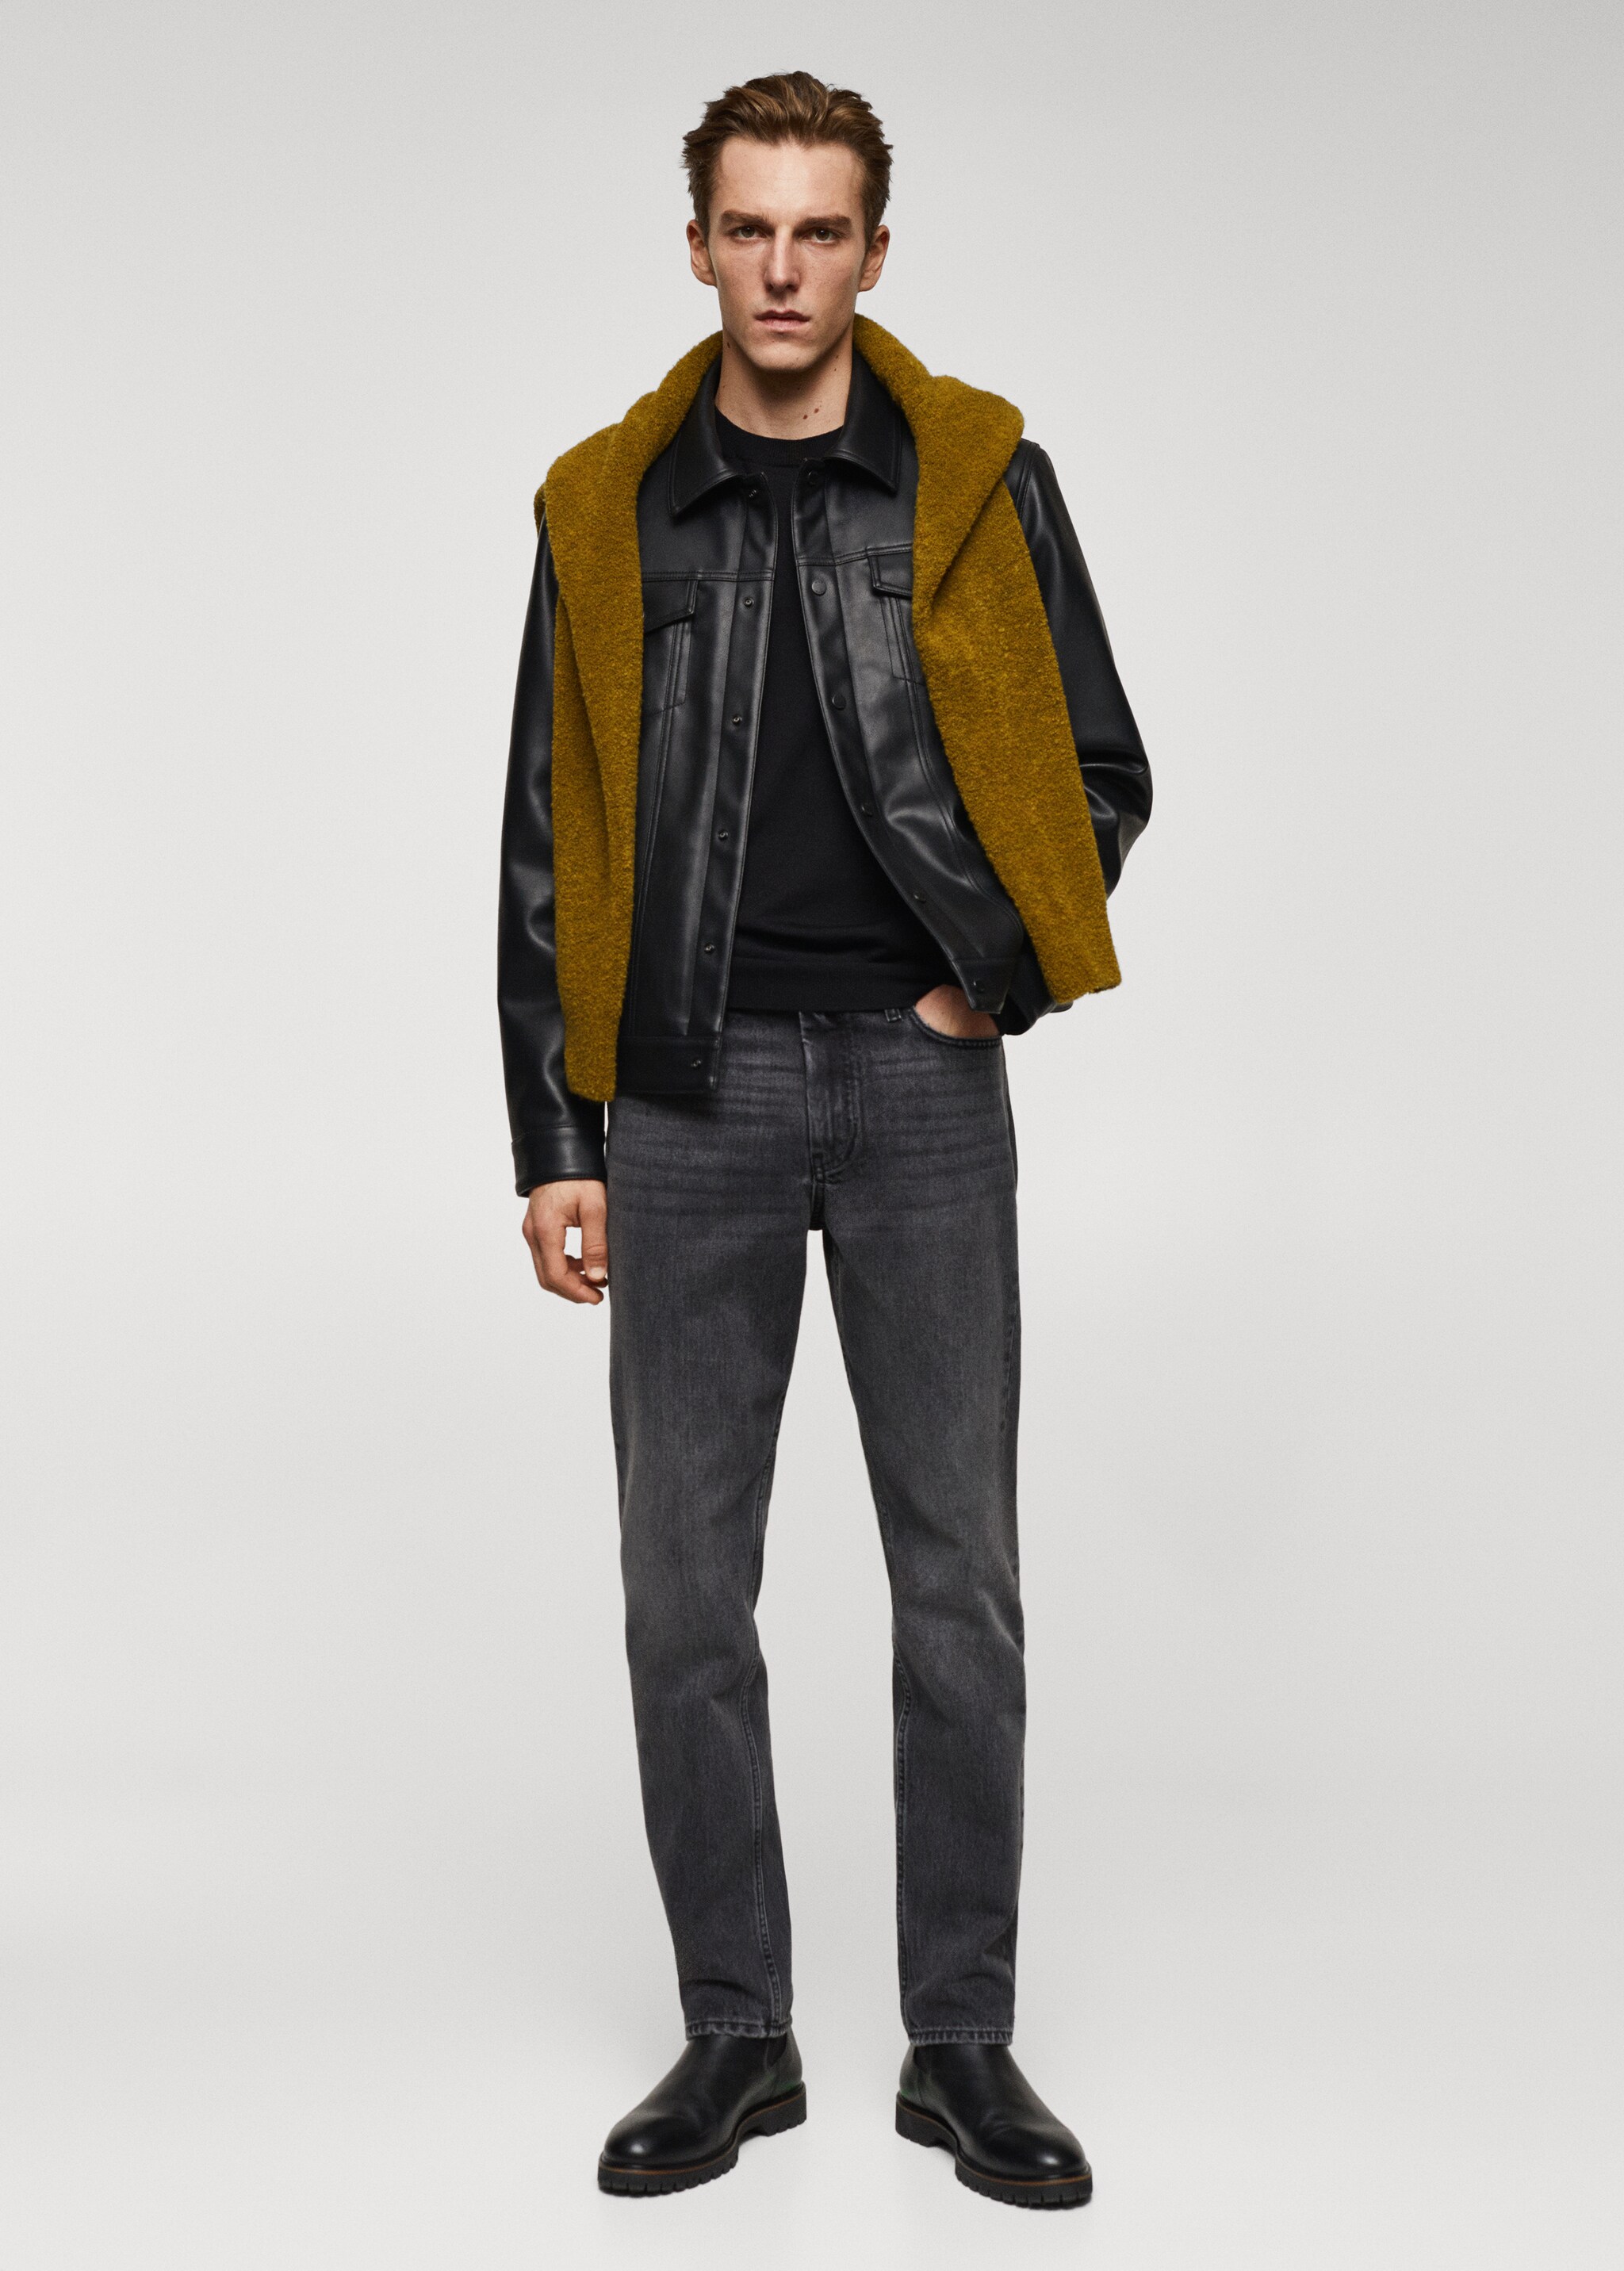 Faux leather jacket with pockets - General plane